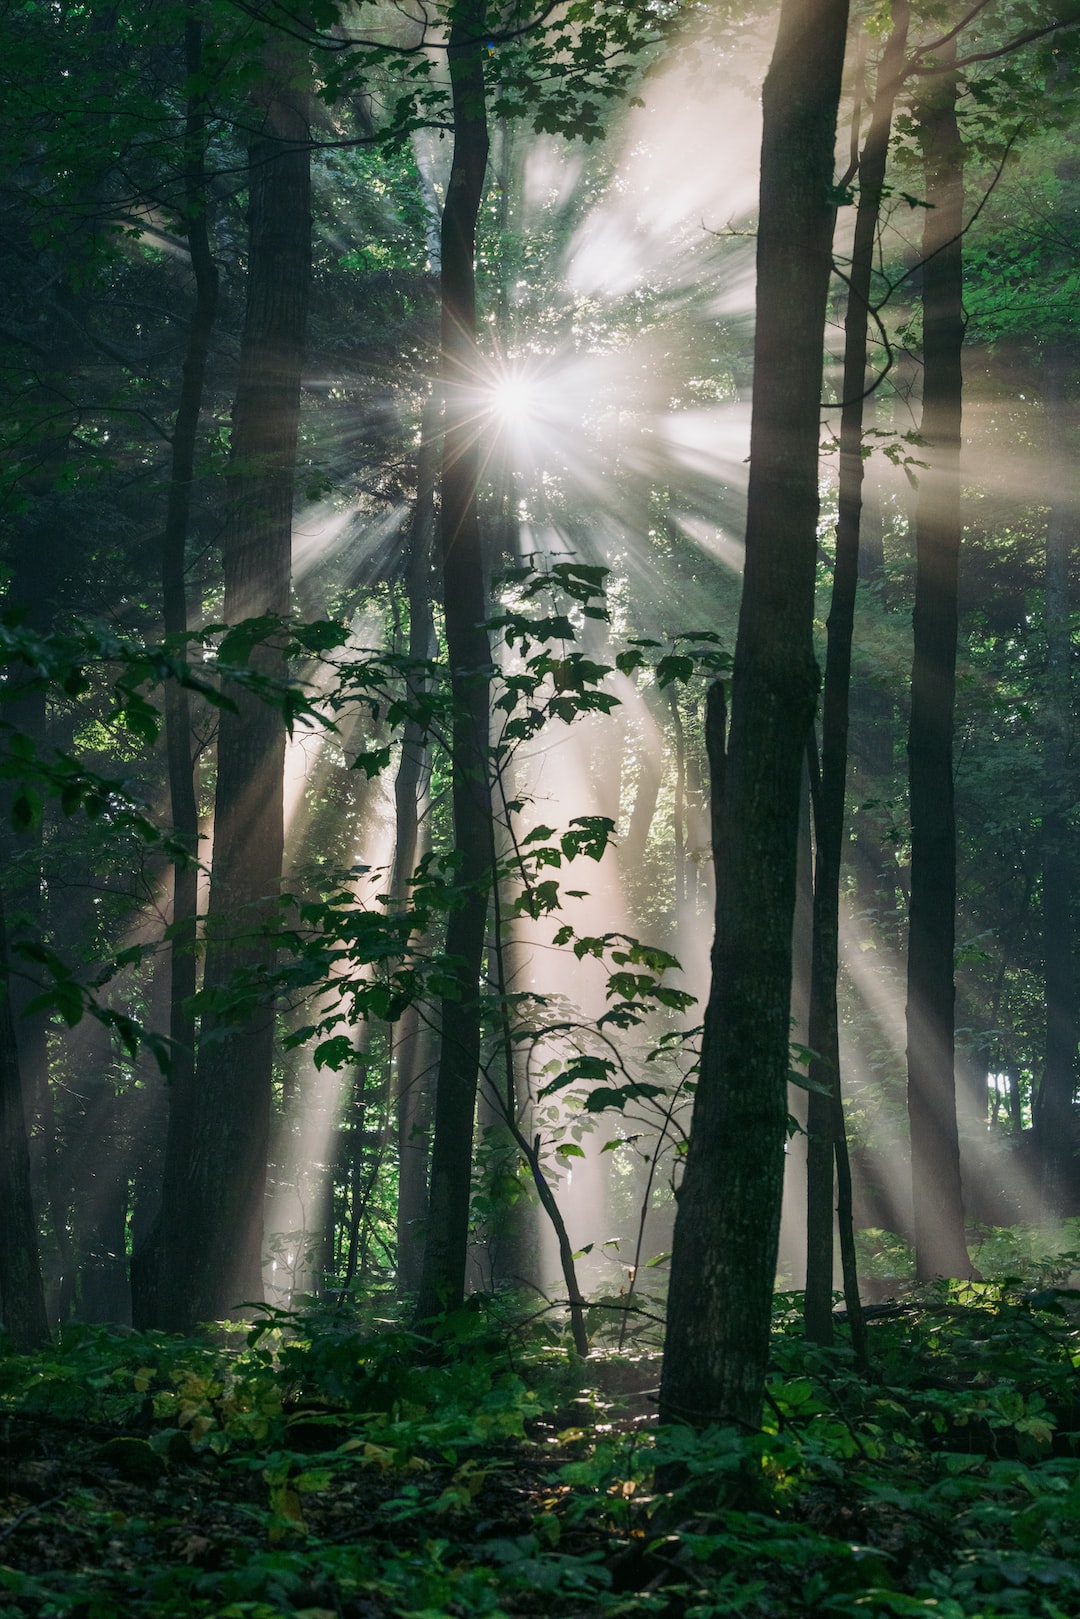 The sun shines through the misty forest, creating long-trailing rays and an ethereal mood.